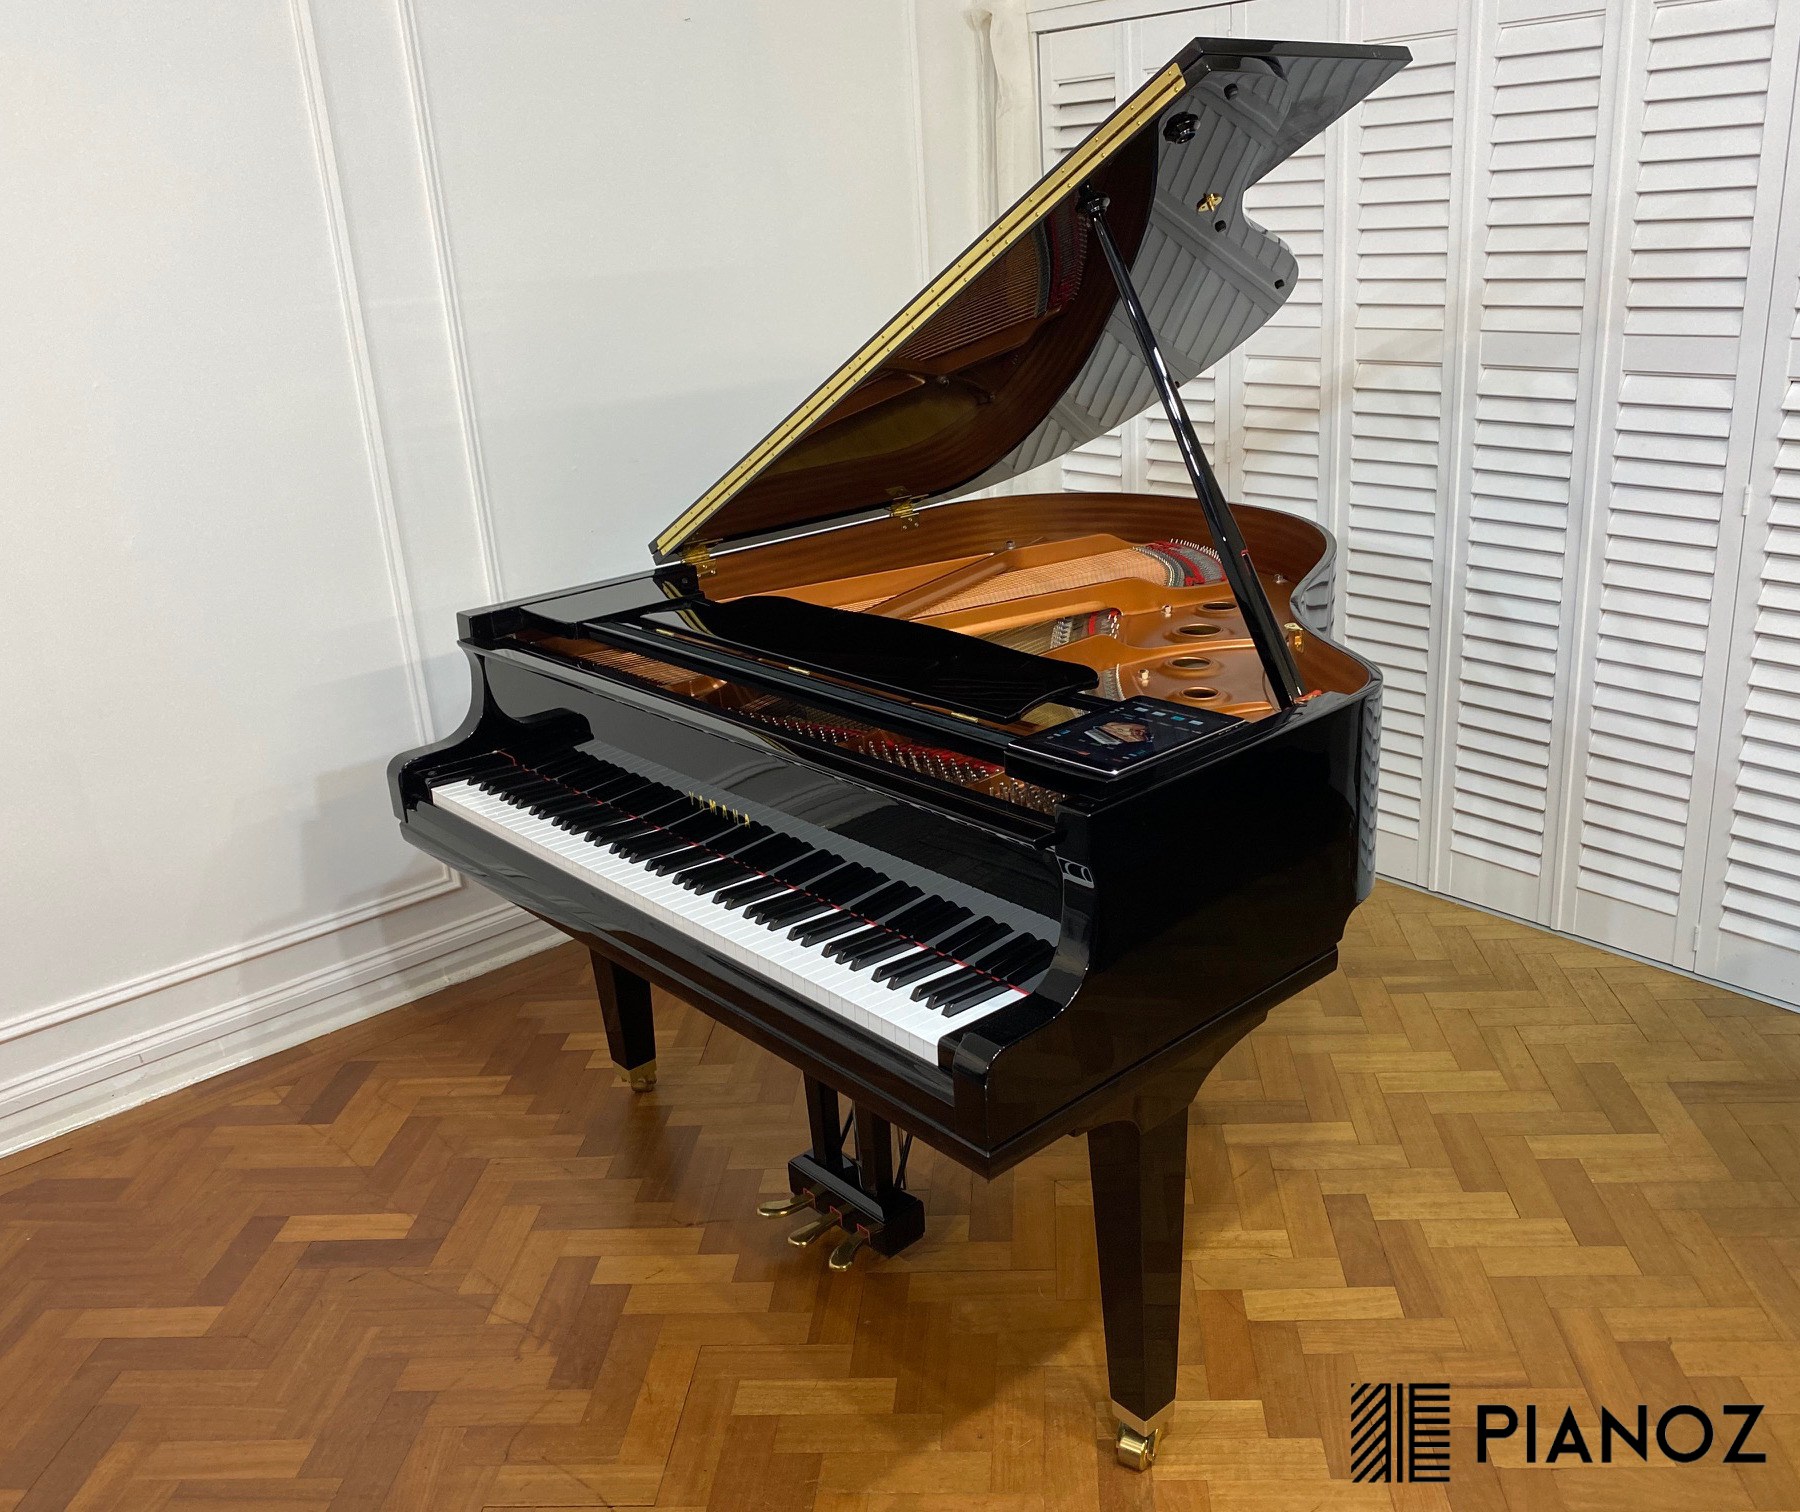 Yamaha GC1 Self Playing Baby Grand Piano piano for sale in UK